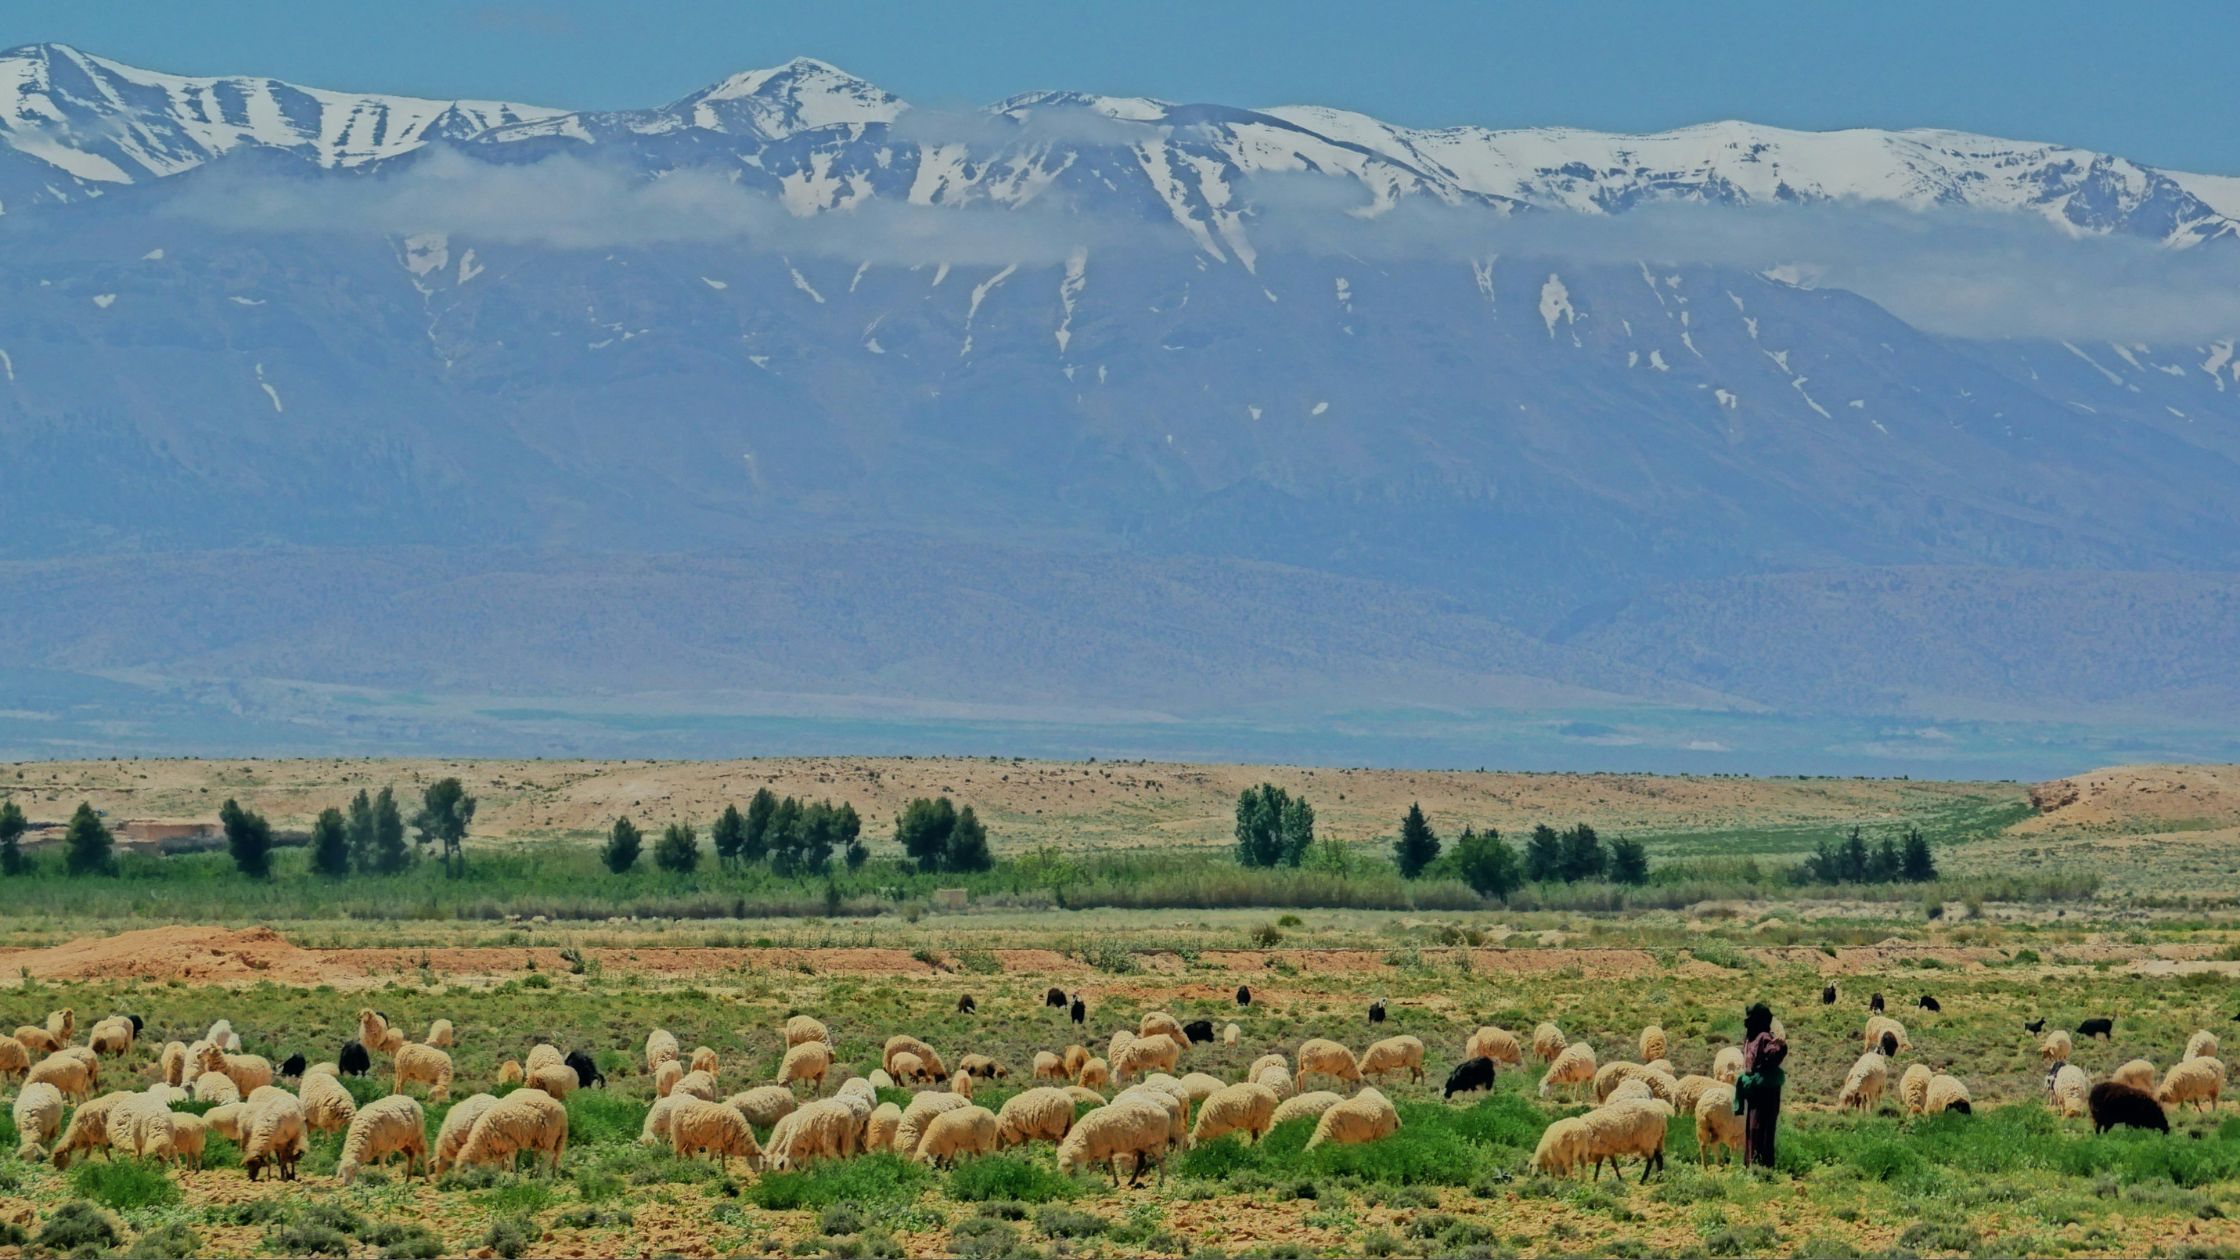 Sheep in a green plain in front of the snowy Atlas Mountains of Morocco